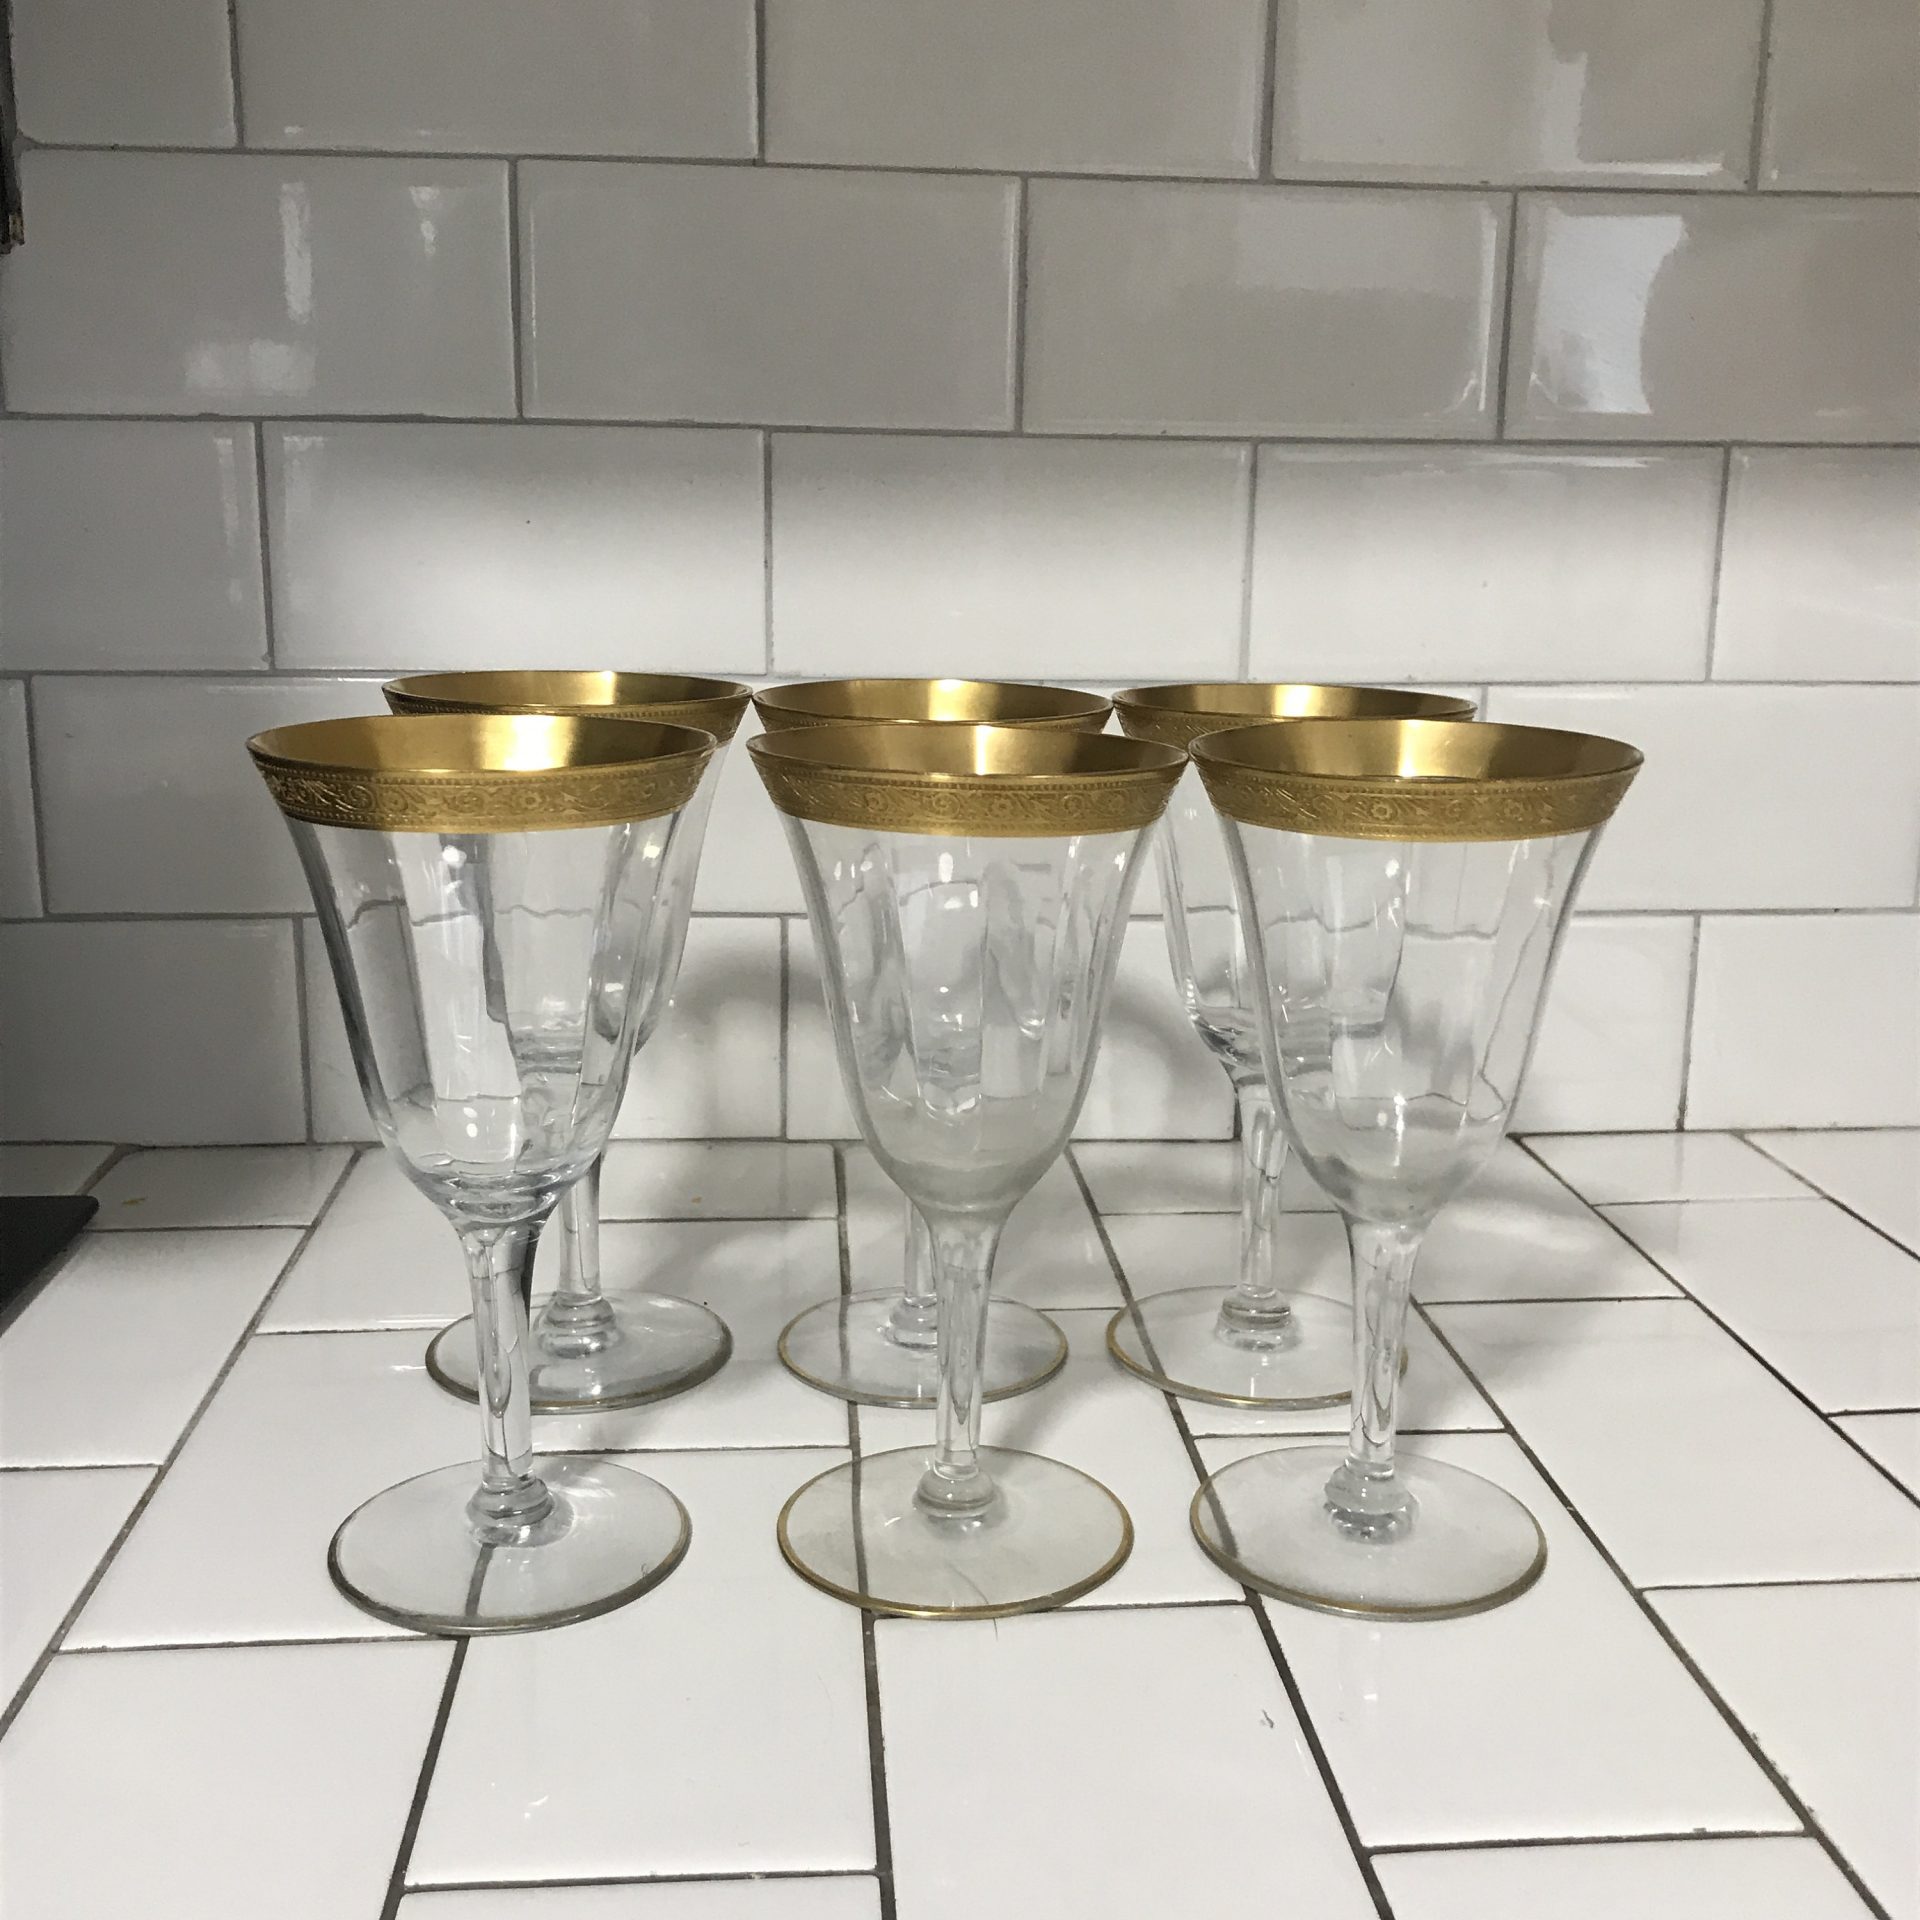 https://www.truevintageantiques.com/wp-content/uploads/2021/05/vintage-set-of-6-wine-glasses-water-goblets-paneled-crystal-with-heavy-gold-ornate-trim-display-collectible-evening-dining-6099092f1-scaled.jpg